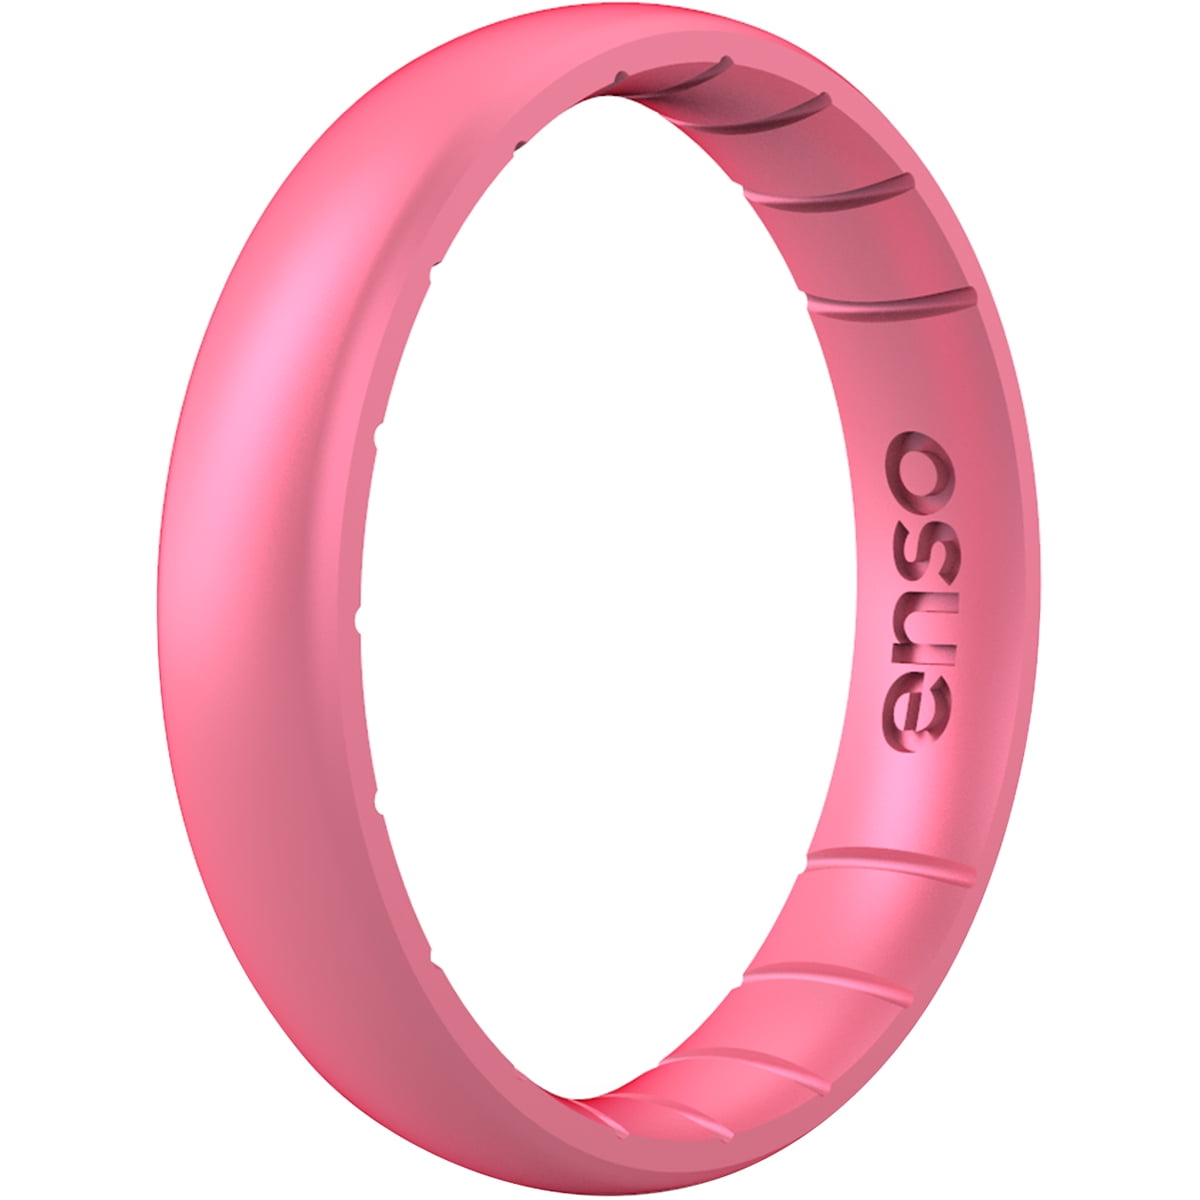 Enso Rings Thin Legends Series Silicone Ring - Yeti - 9